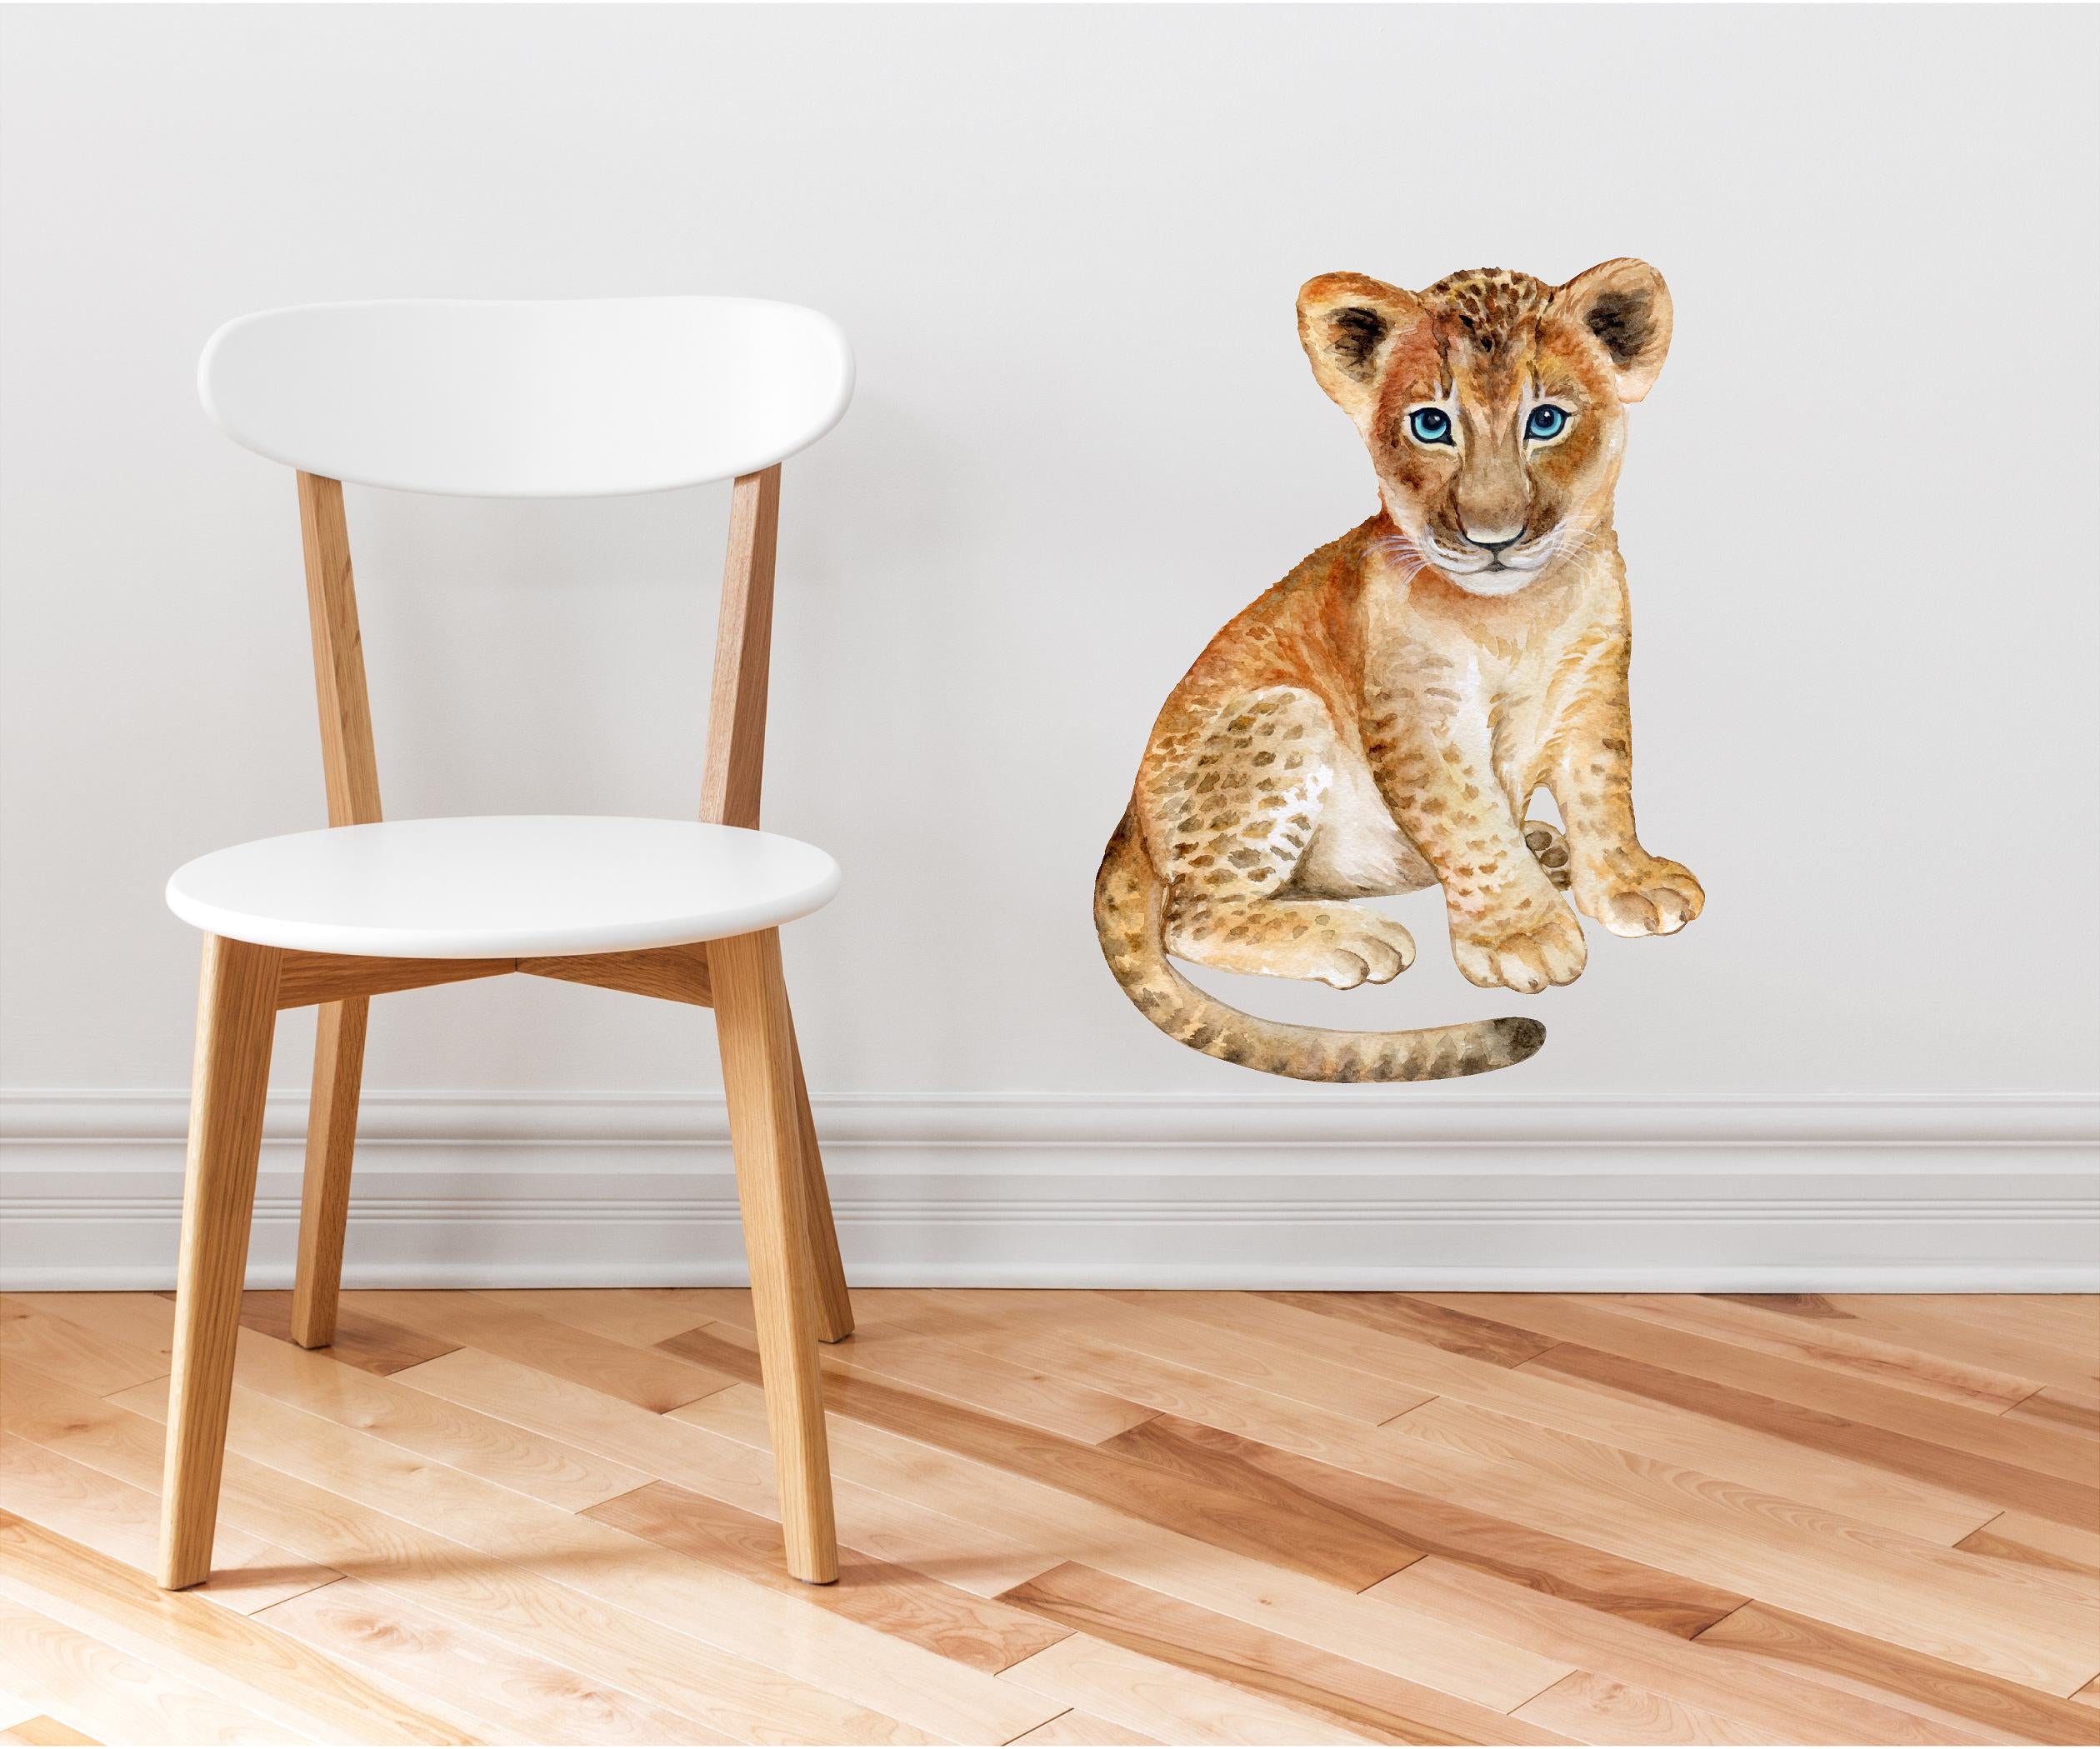 Baby Lion Wall Decal Safari Animal Wall Sticker Removable Fabric Vinyl | DecalBaby